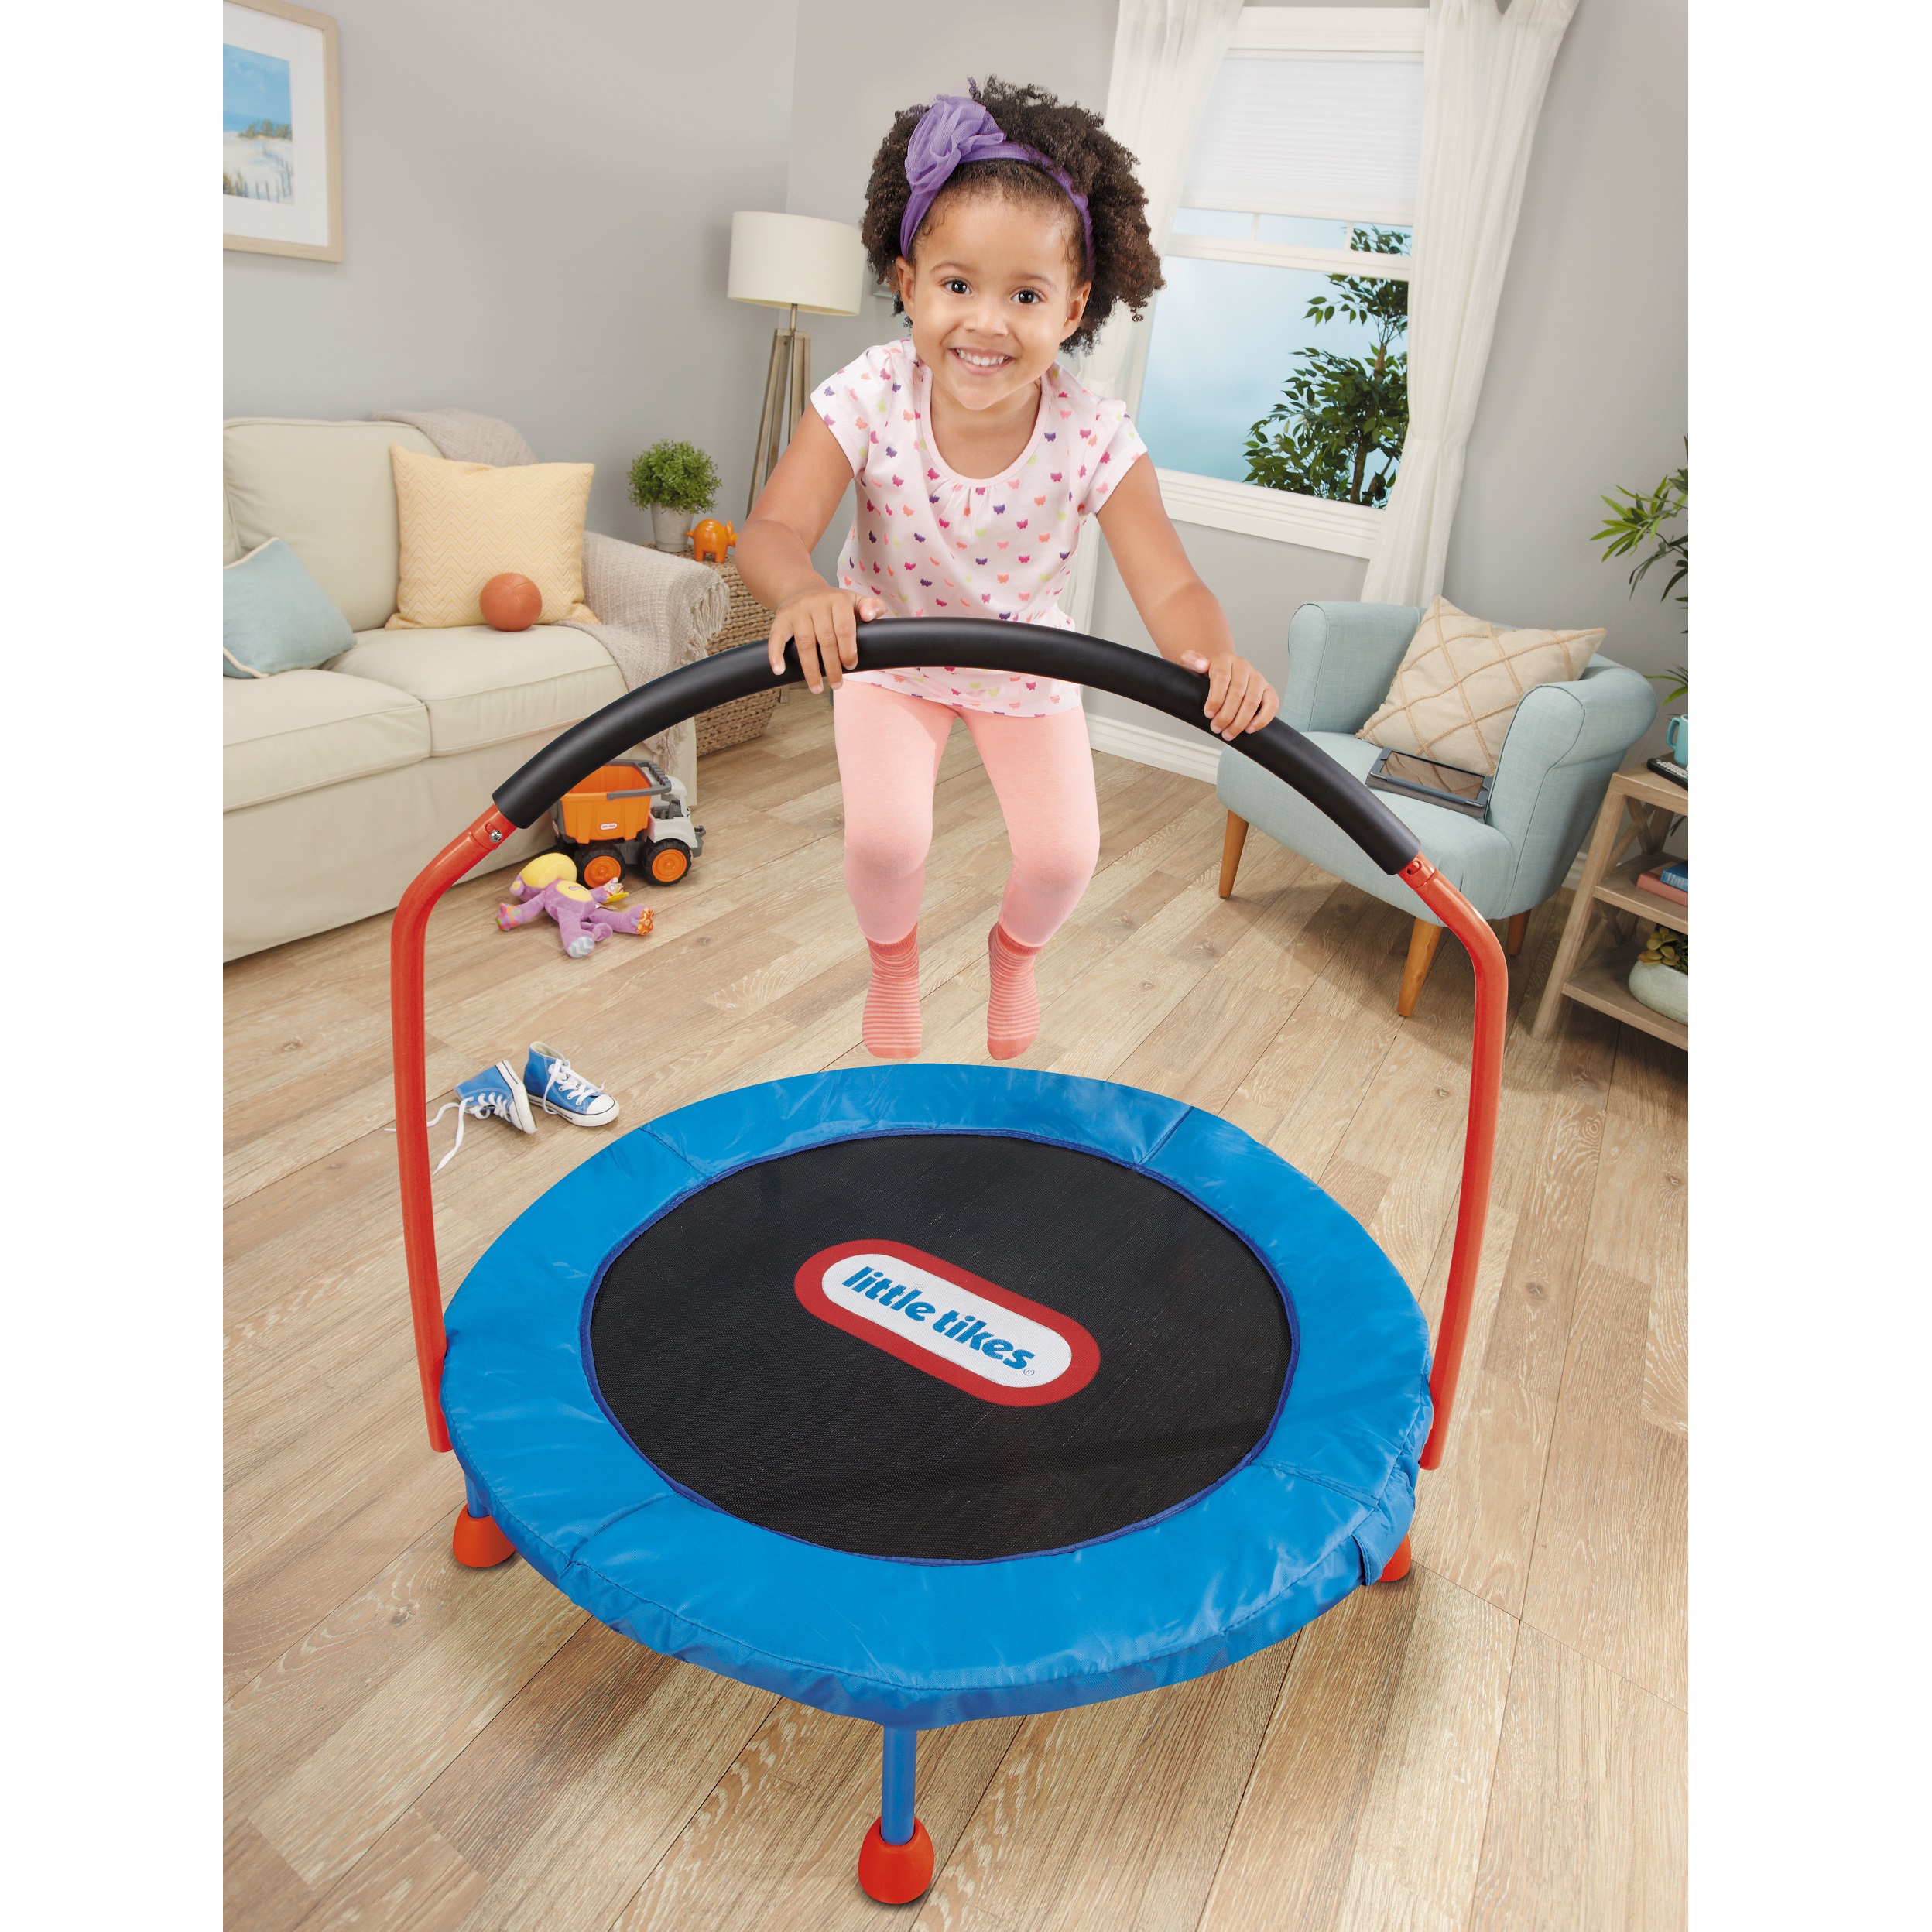 Little Tikes Easy Store 3-Foot Trampoline, with Hand Rail, Blue - image 3 of 8